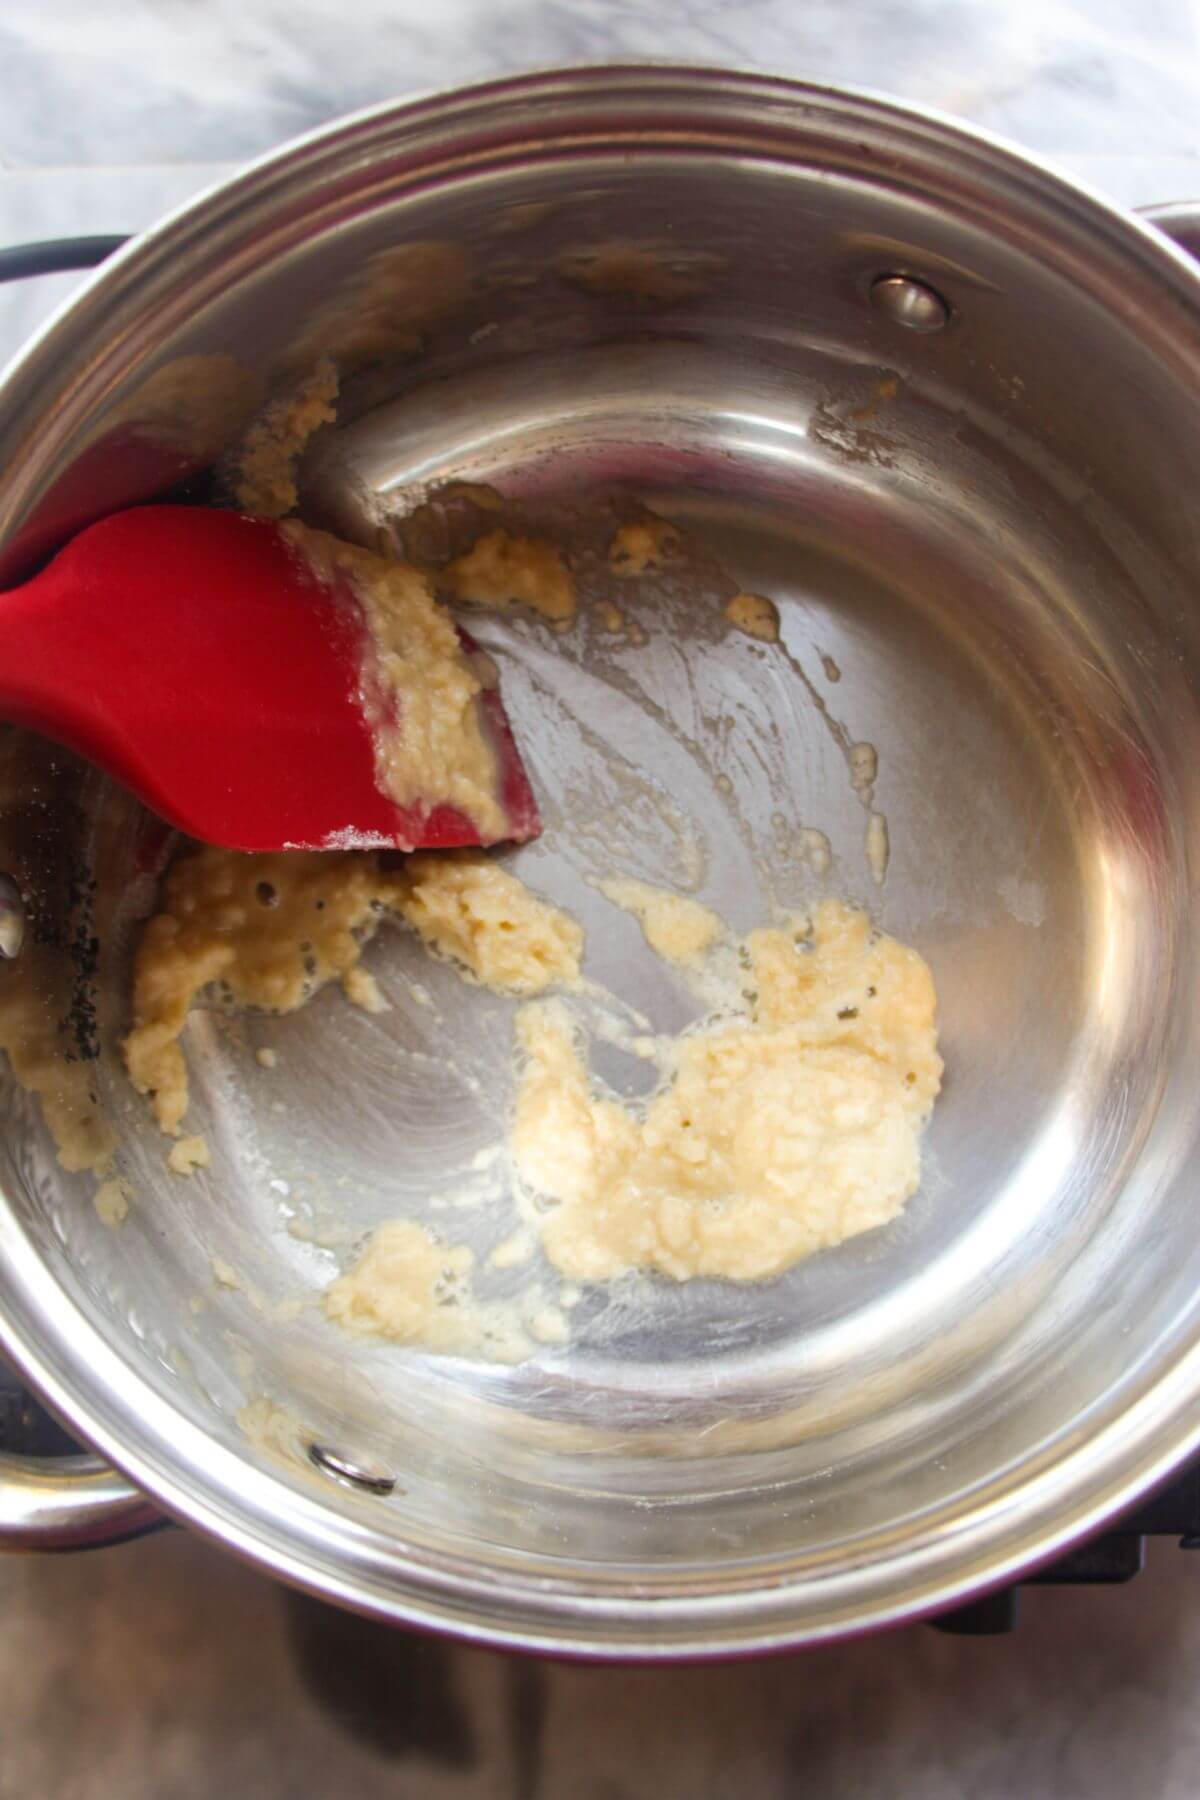 Red spatula stirring butter and flour into a roux in a small silver pot.